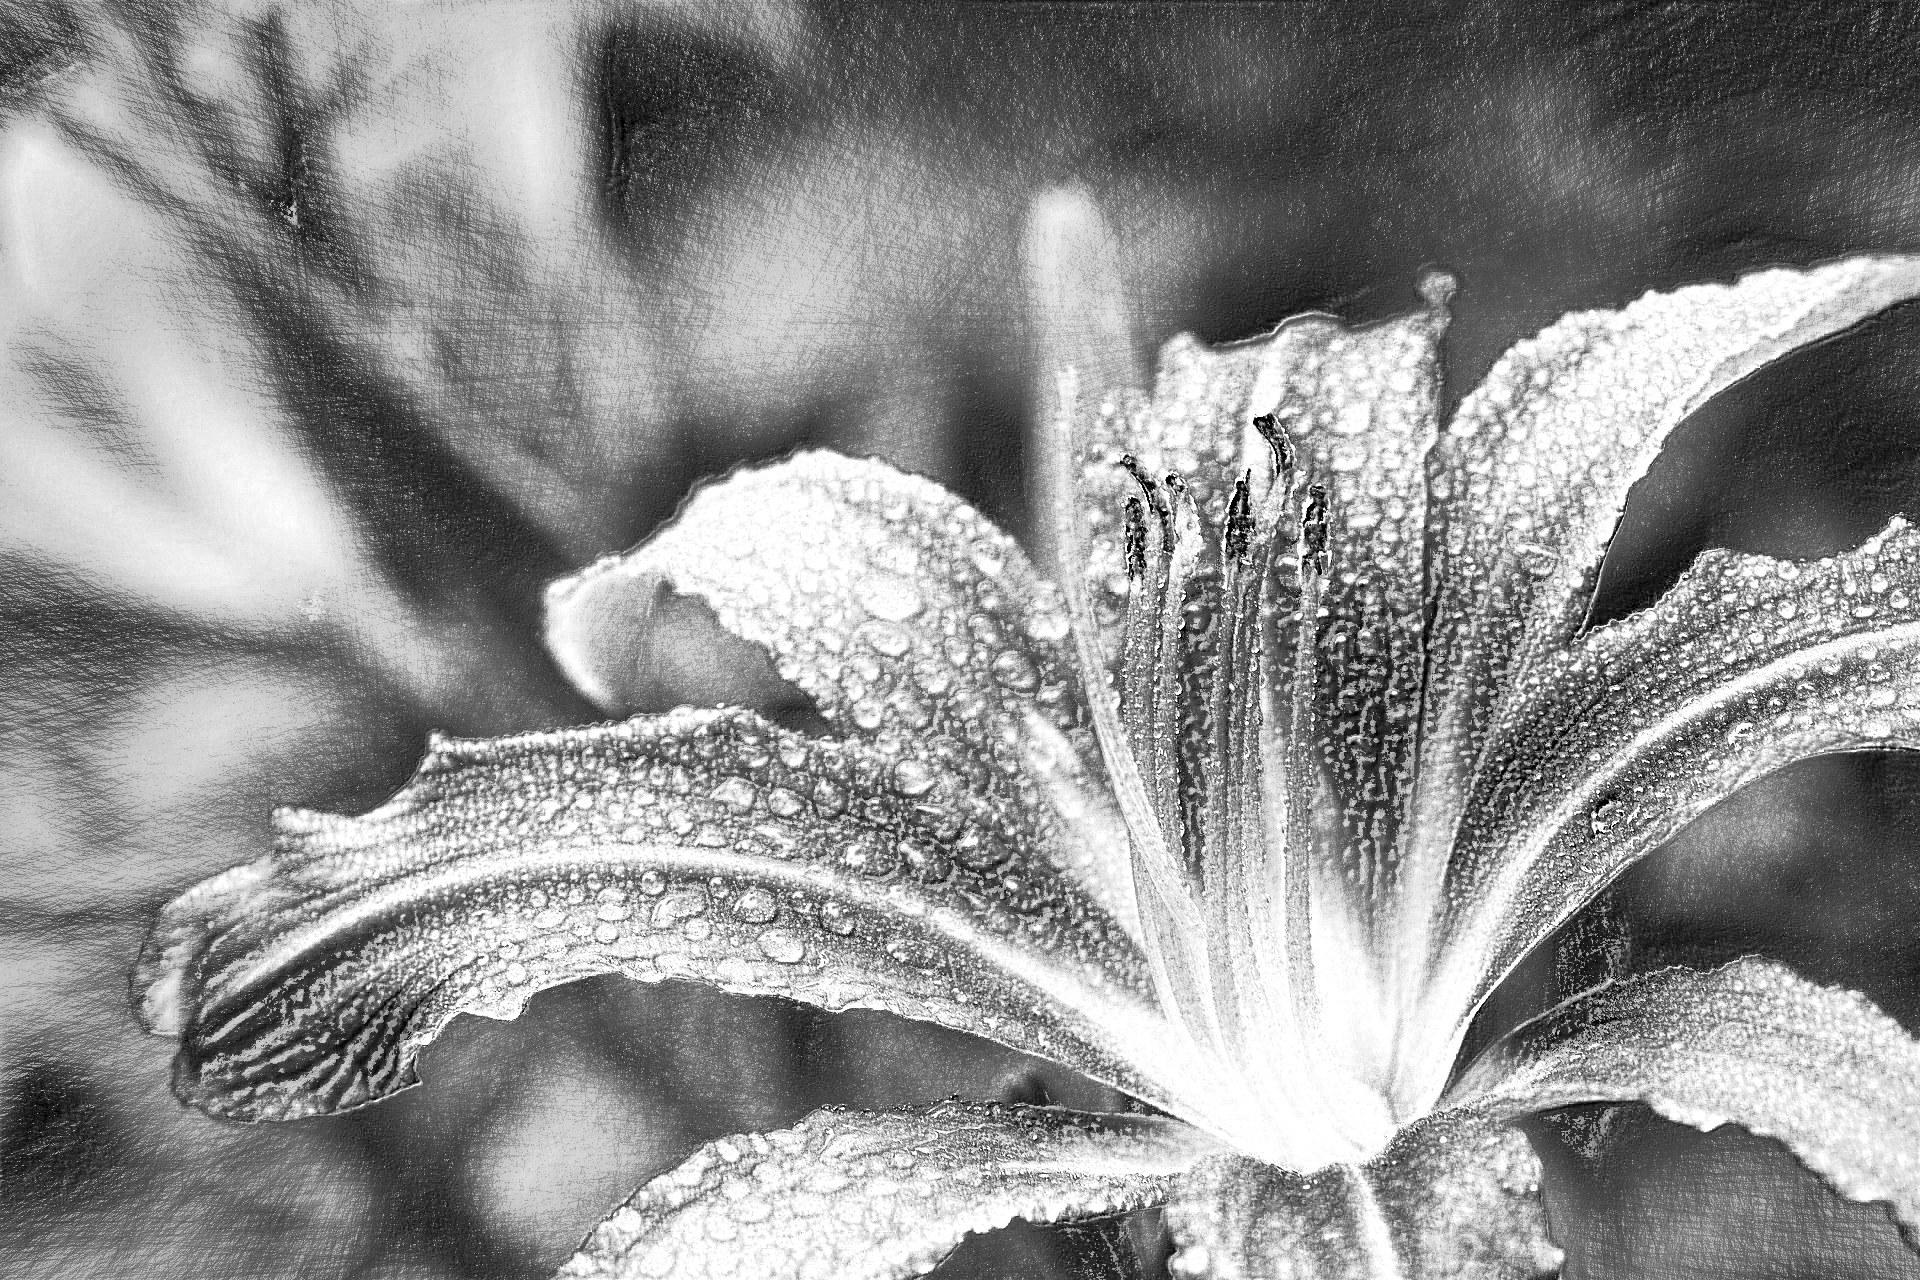 2020-08-22 12-09-30lily-3495722_1920 with a draw on black effect, using option B&W and pencil lead=HB.jpg